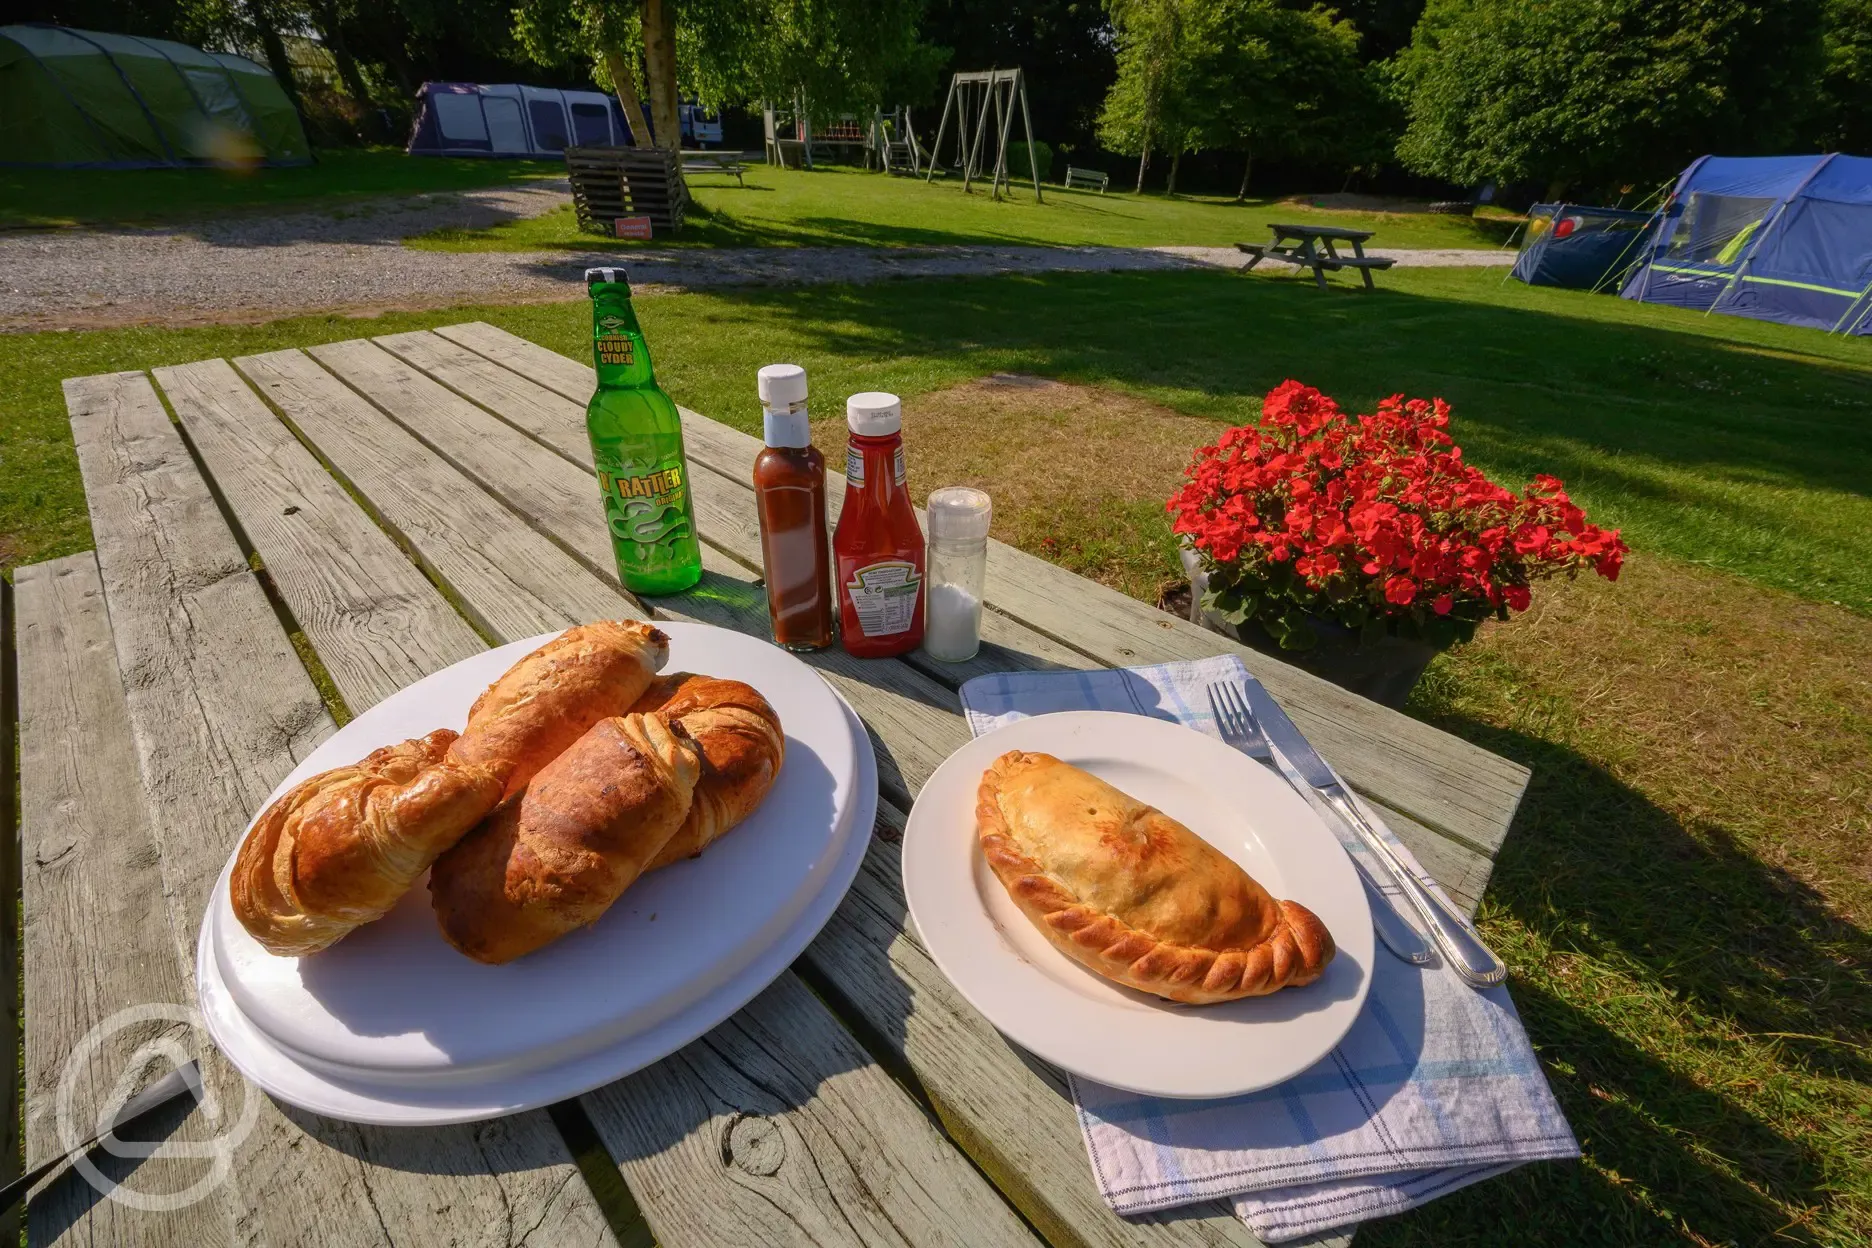 Pastries and local cider sold at The Mine shop